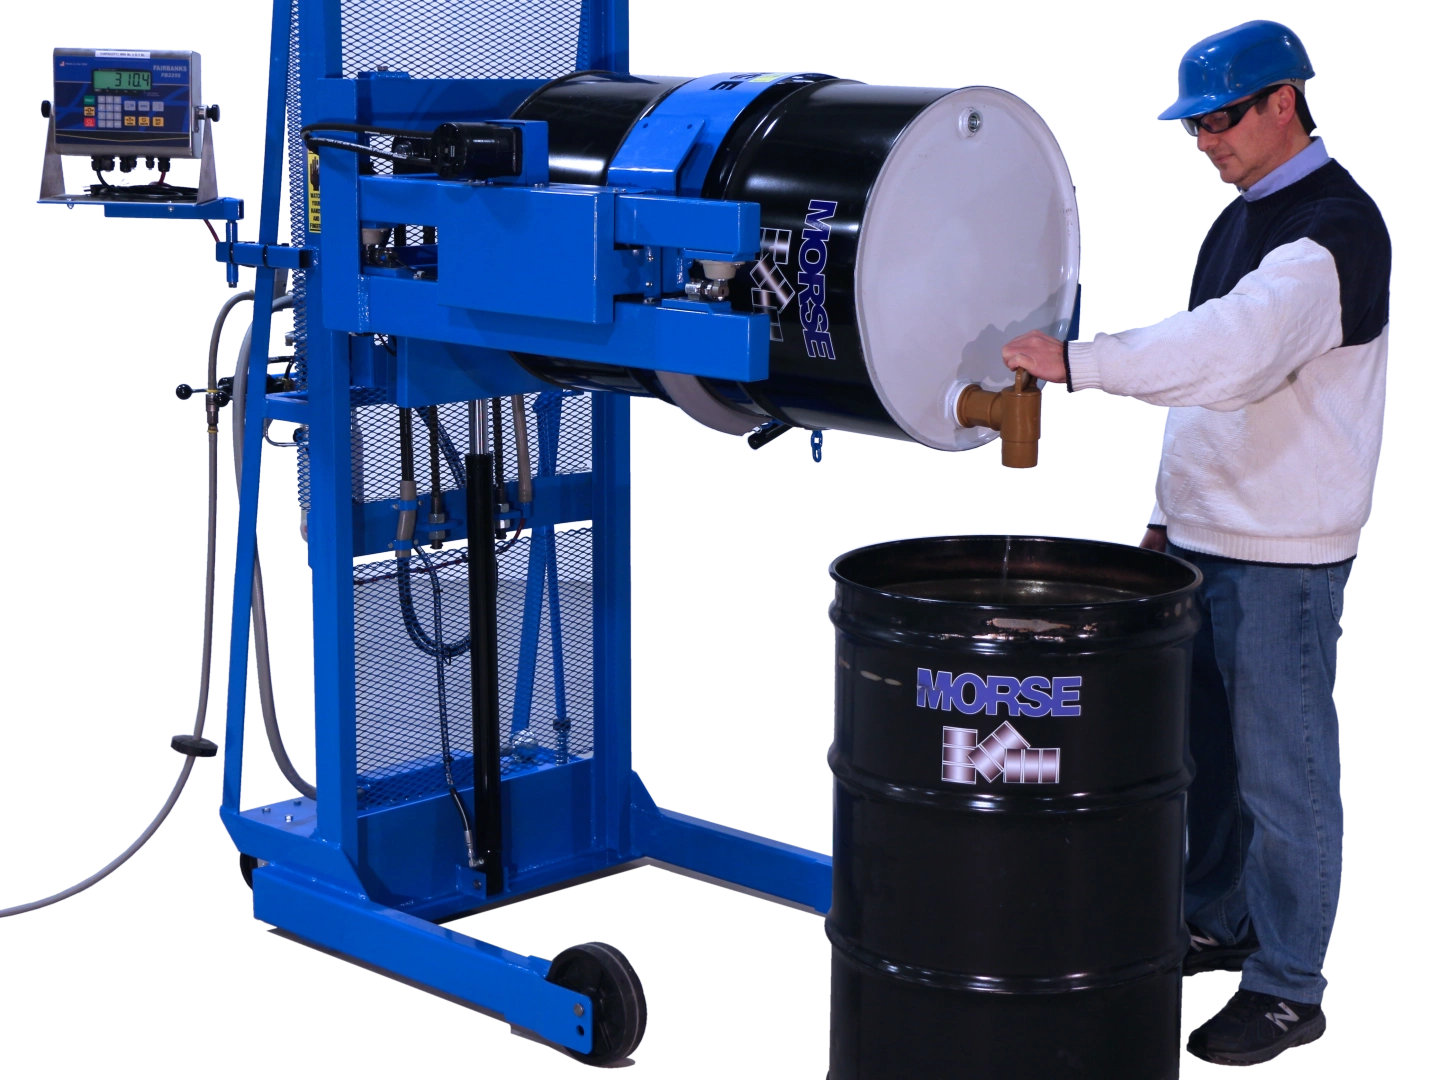 Dispense drum at up to 60" (152 cm) high - Model 515-N-114 shown